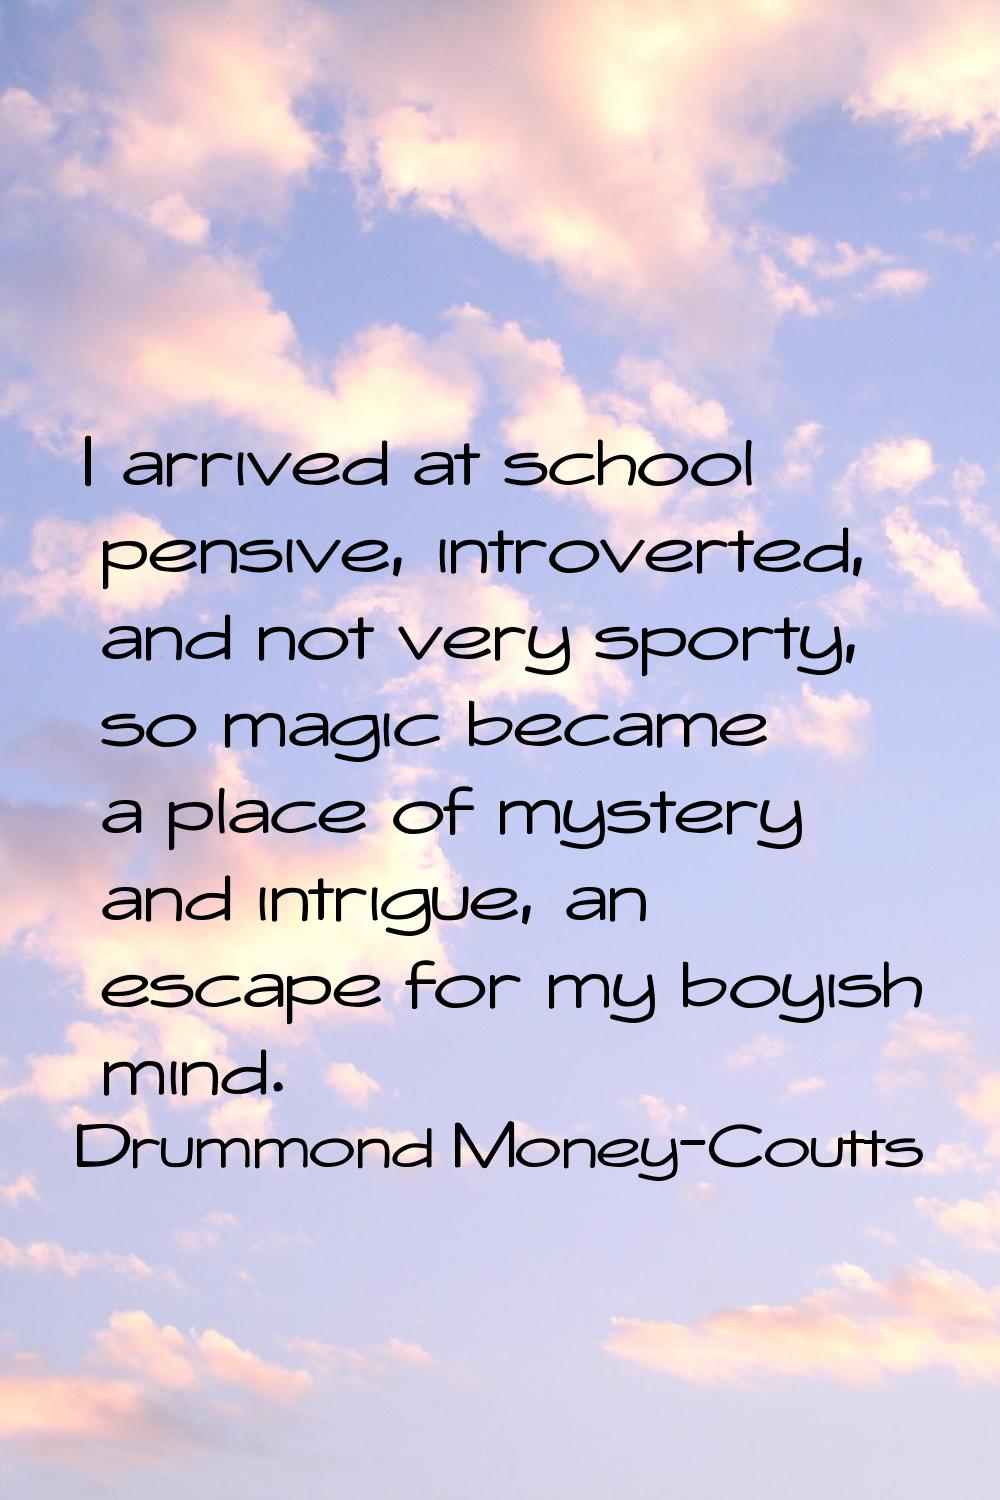 I arrived at school pensive, introverted, and not very sporty, so magic became a place of mystery a